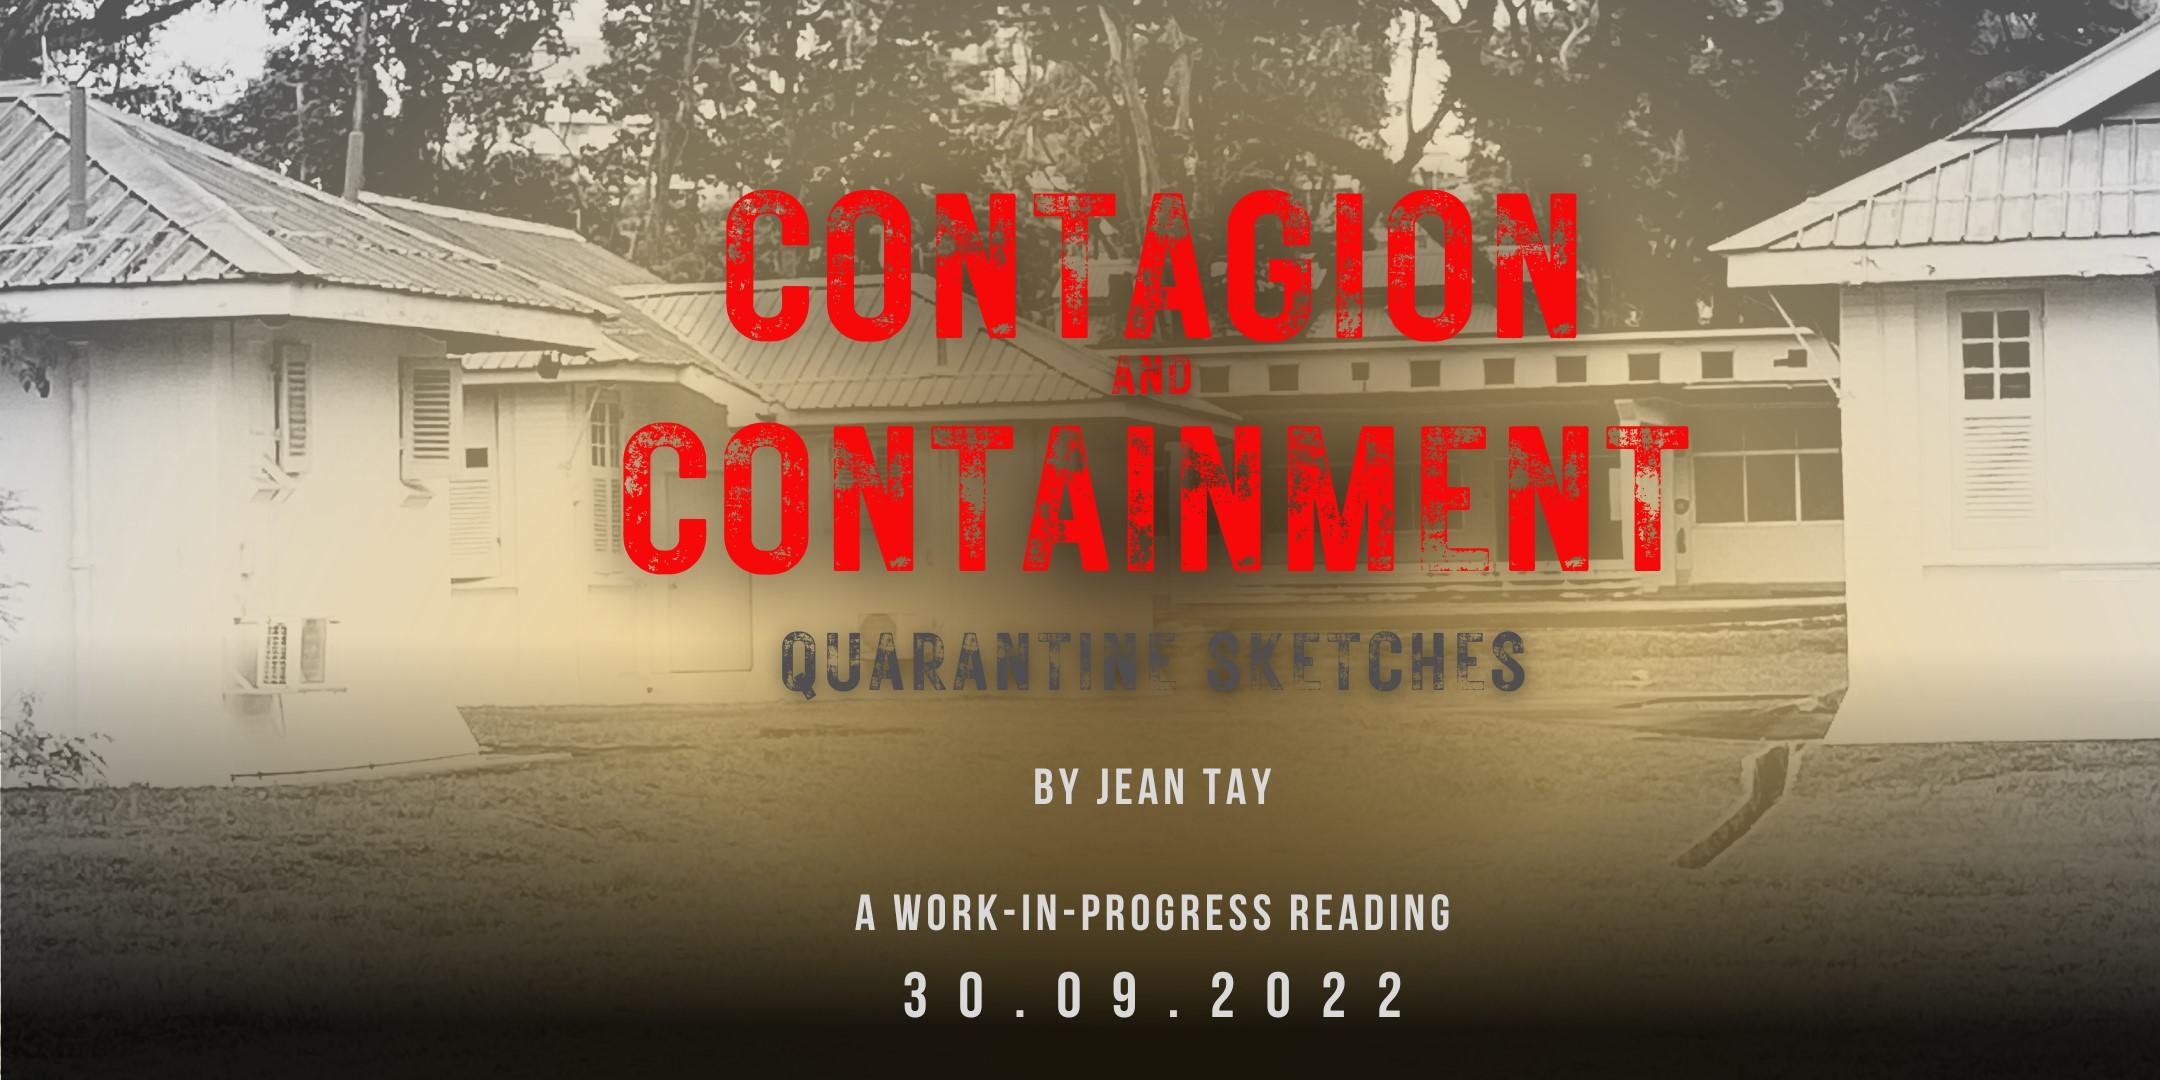 Contagion and Containment: Quarantine Sketches (A Work-in-progress reading)